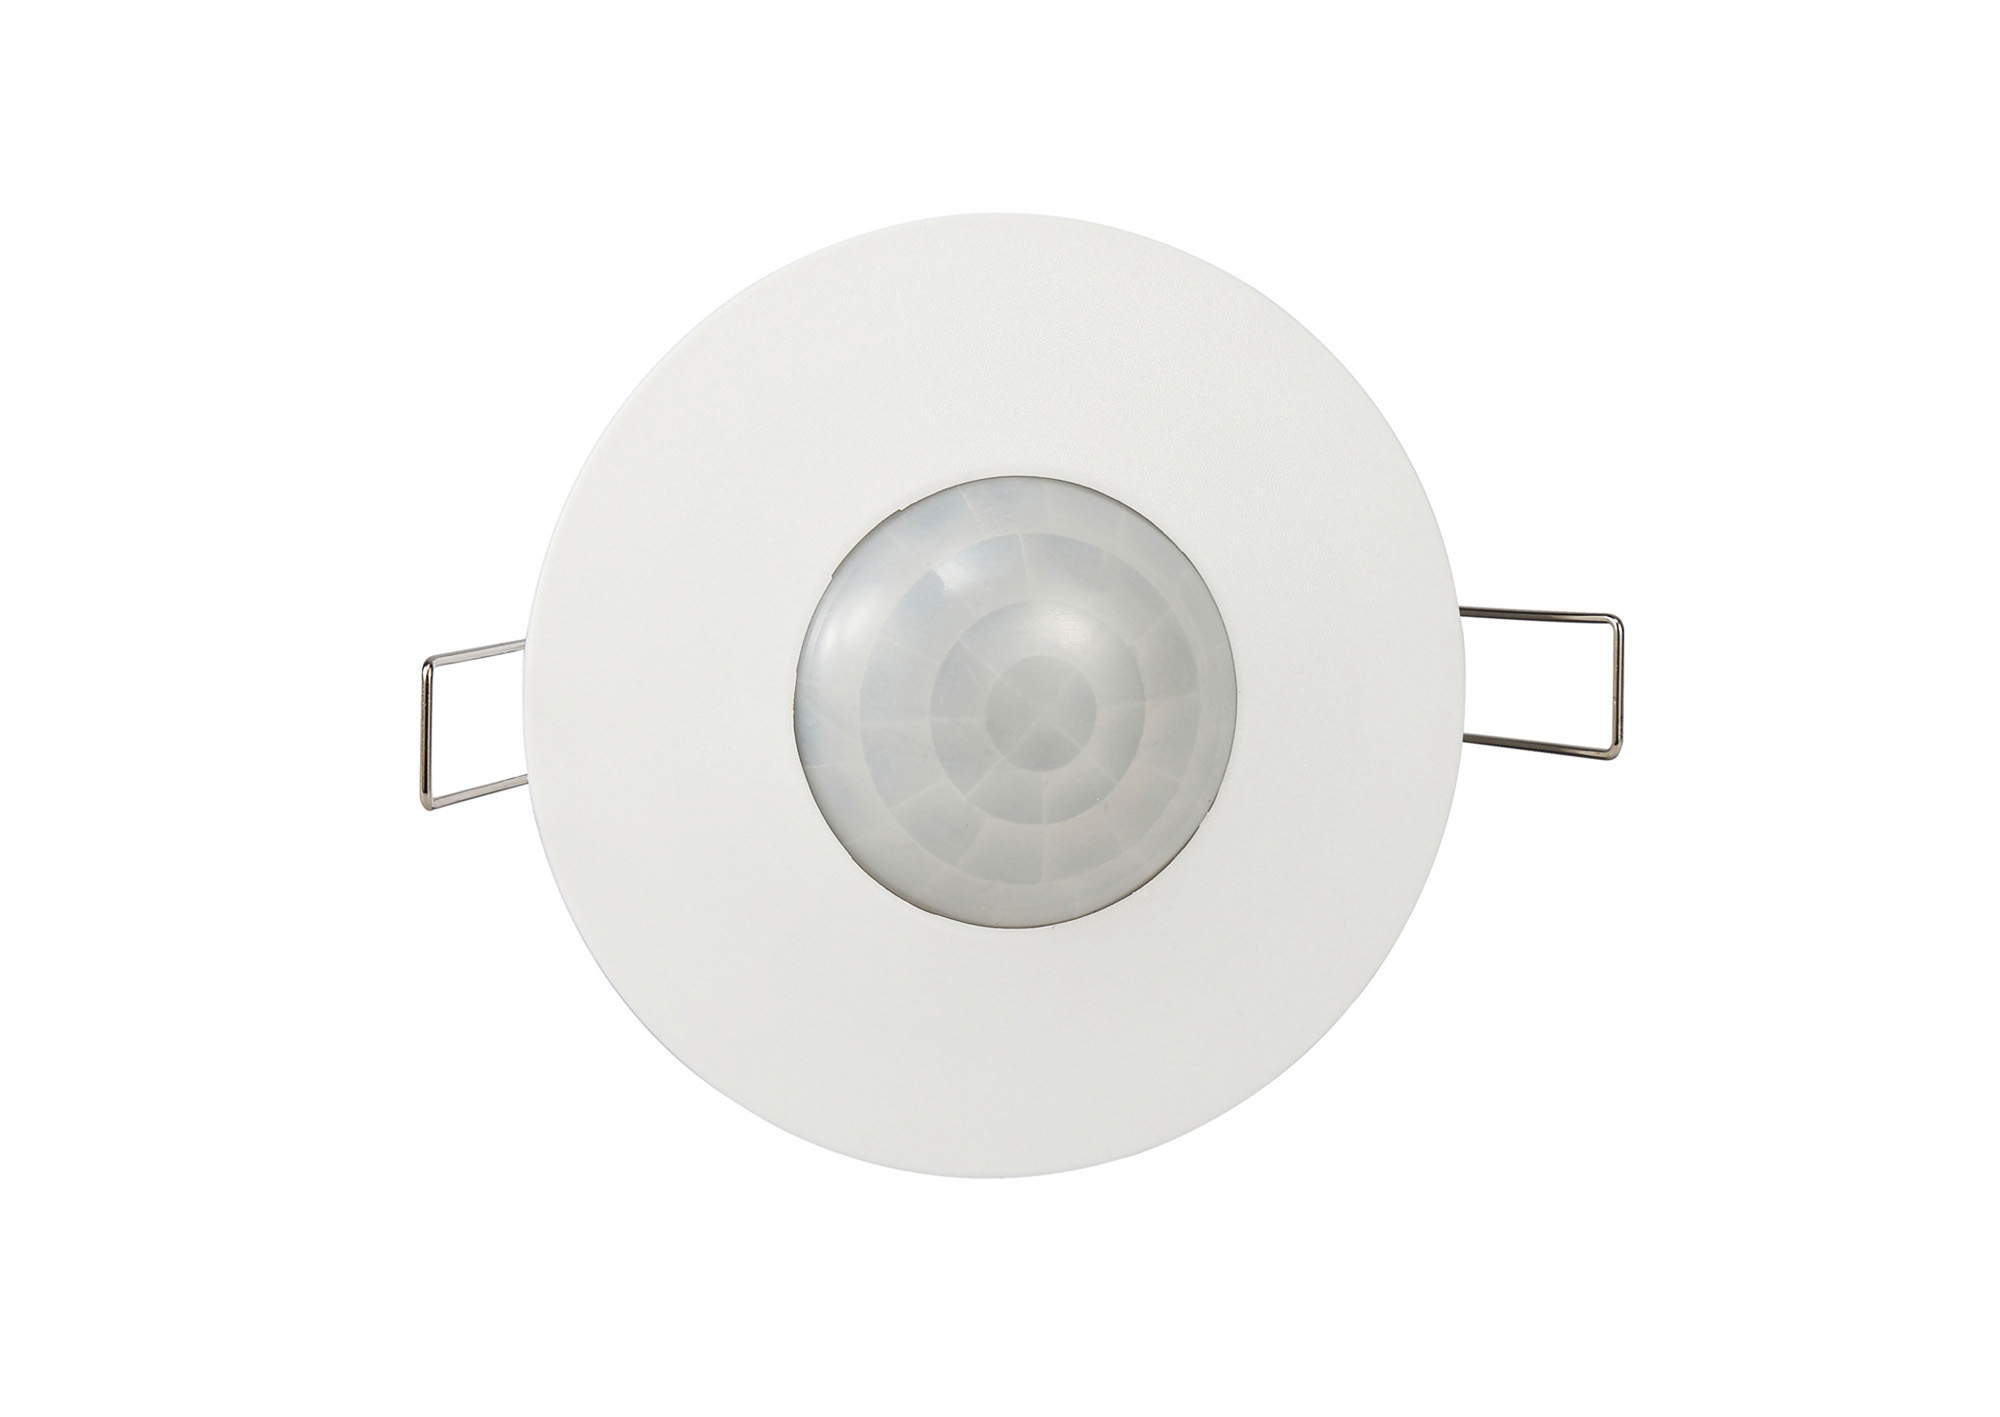 D0064  Espial IP20 6m PIR Detector White; Frosted White